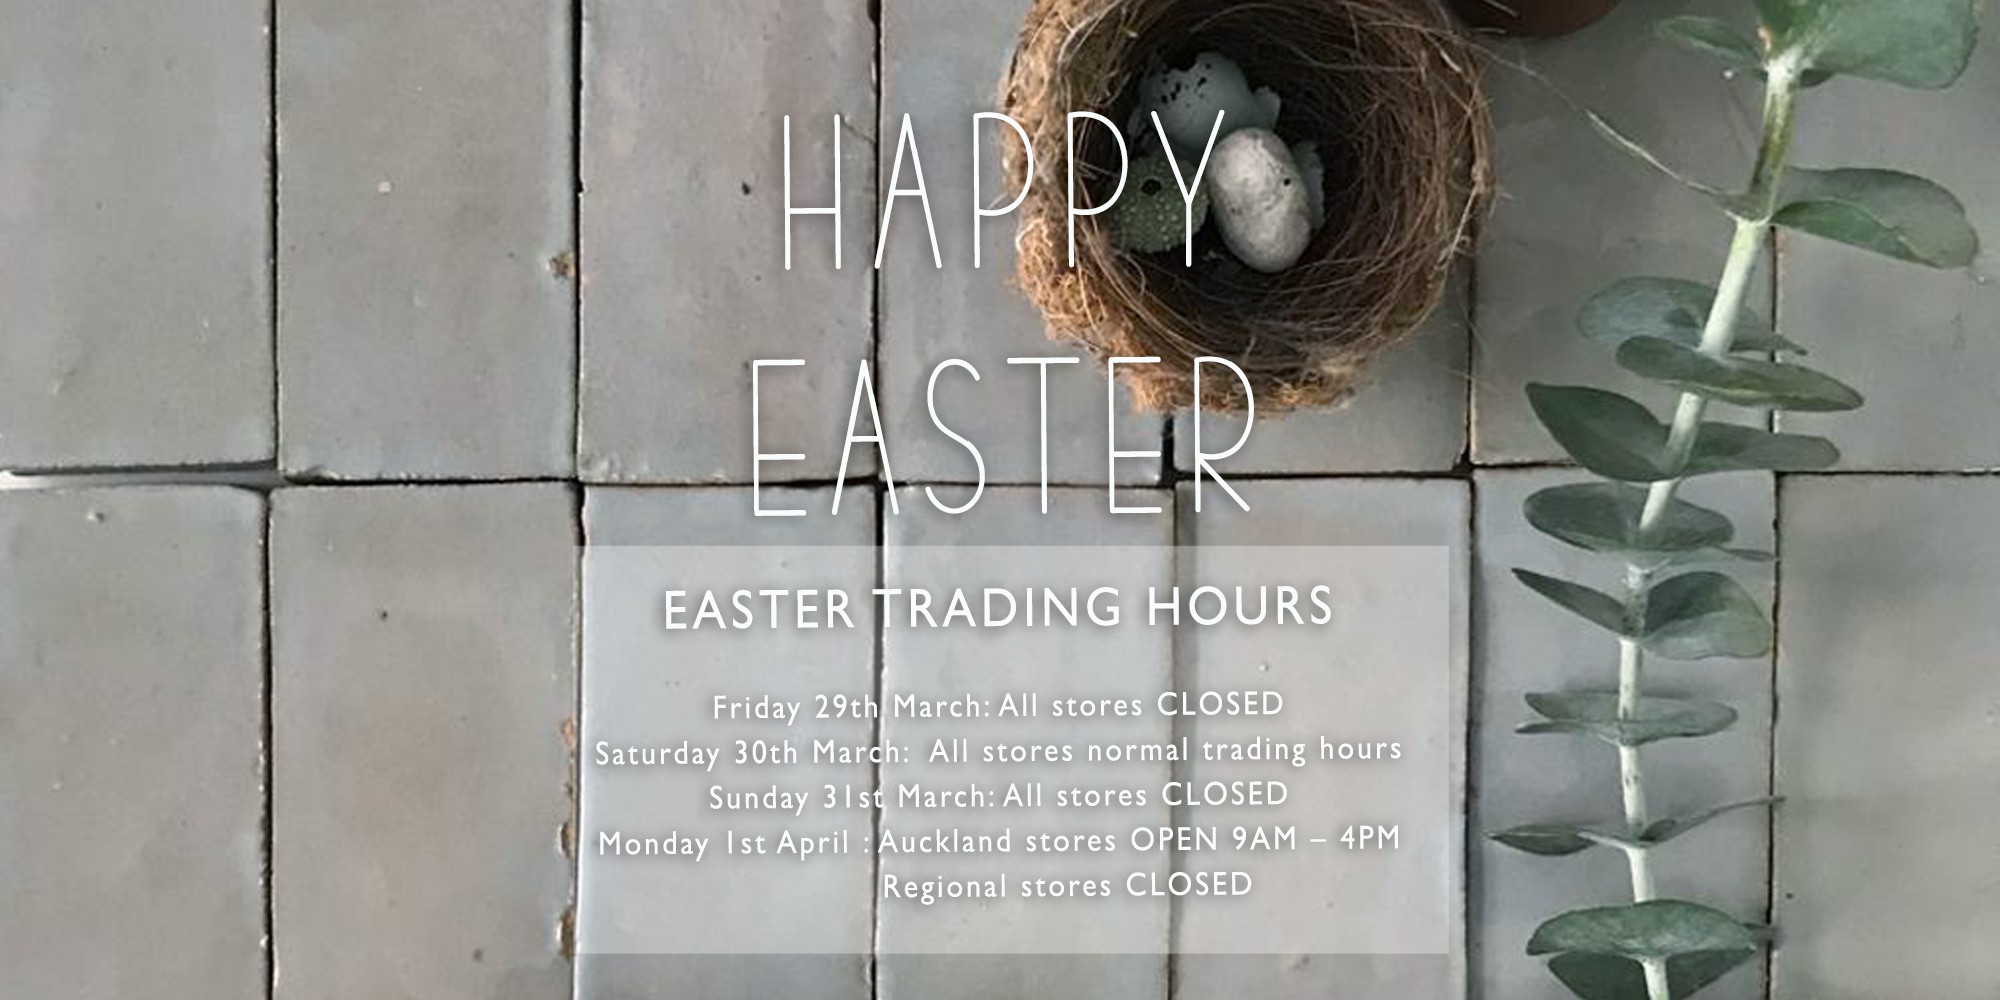 EASTER TRADING HOURS